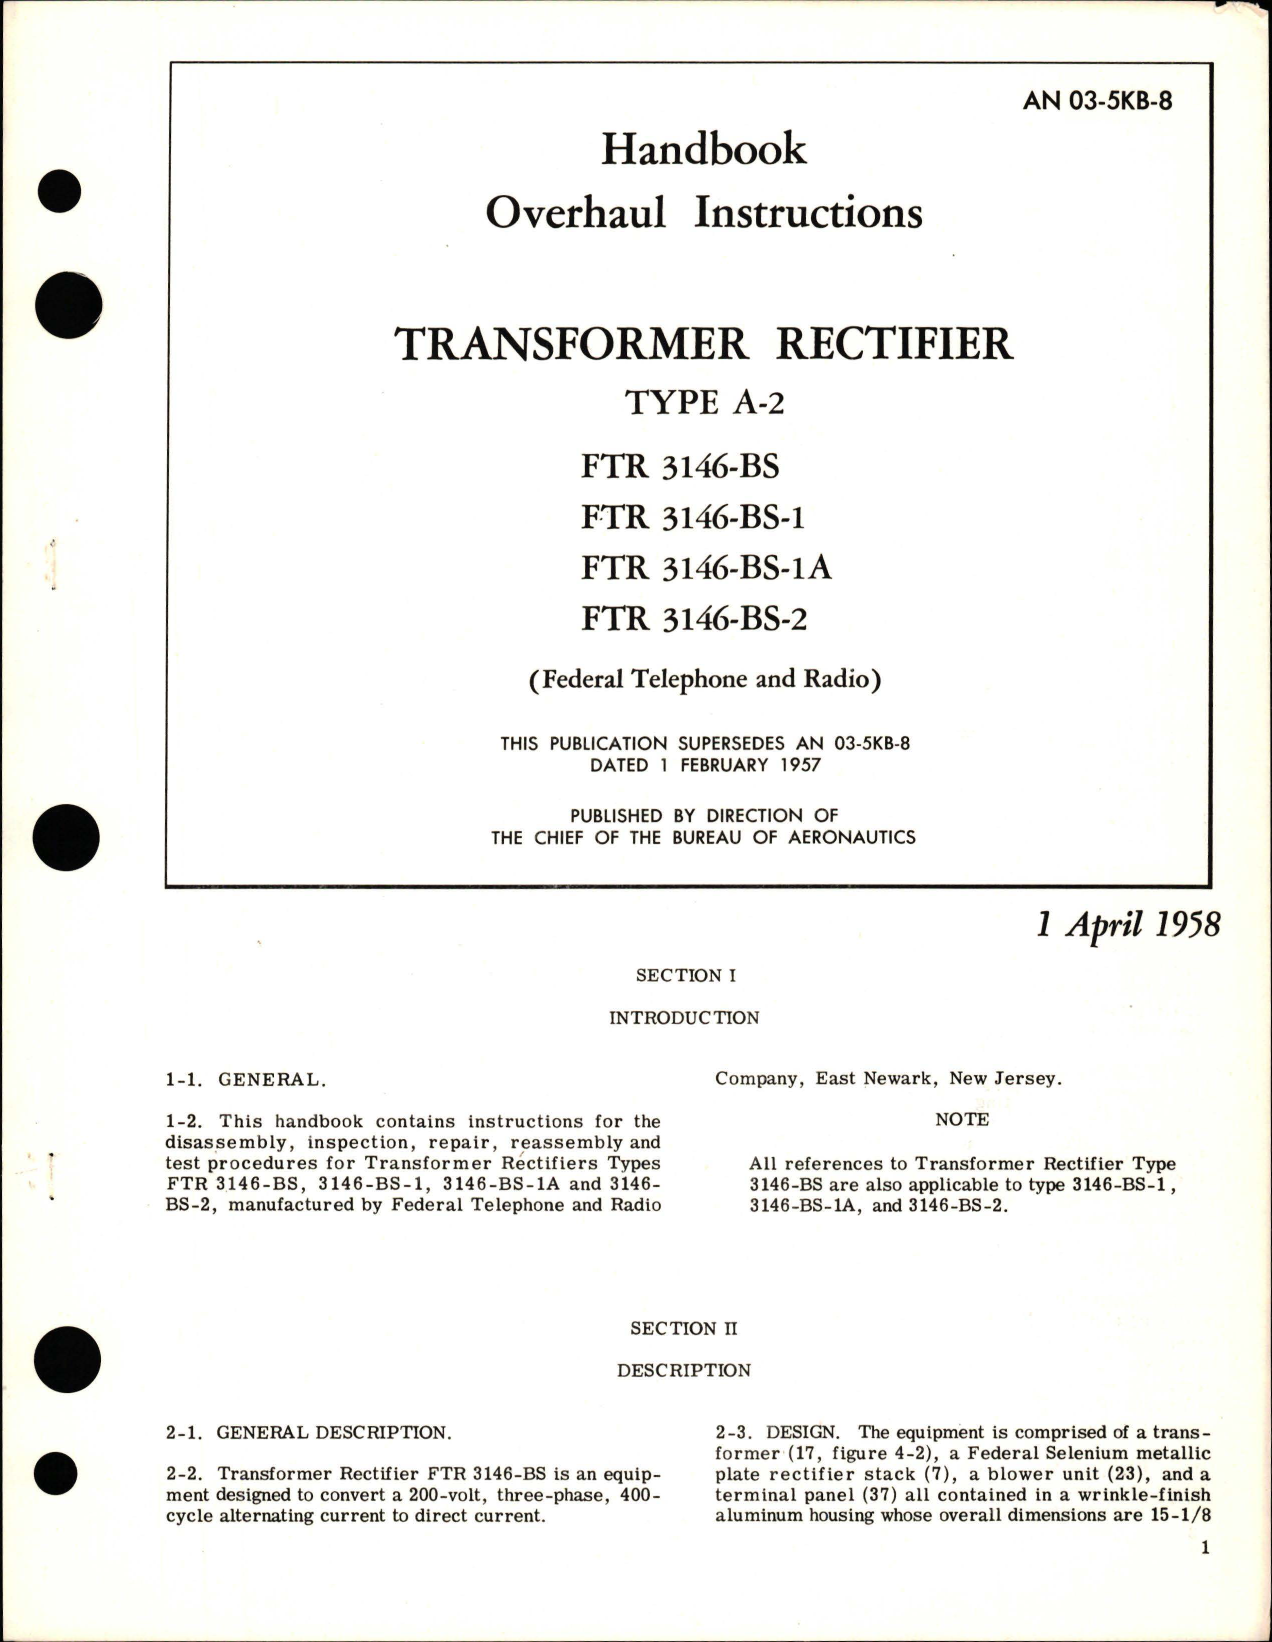 Sample page 1 from AirCorps Library document: Overhaul Instructions for Transformer Rectifier 